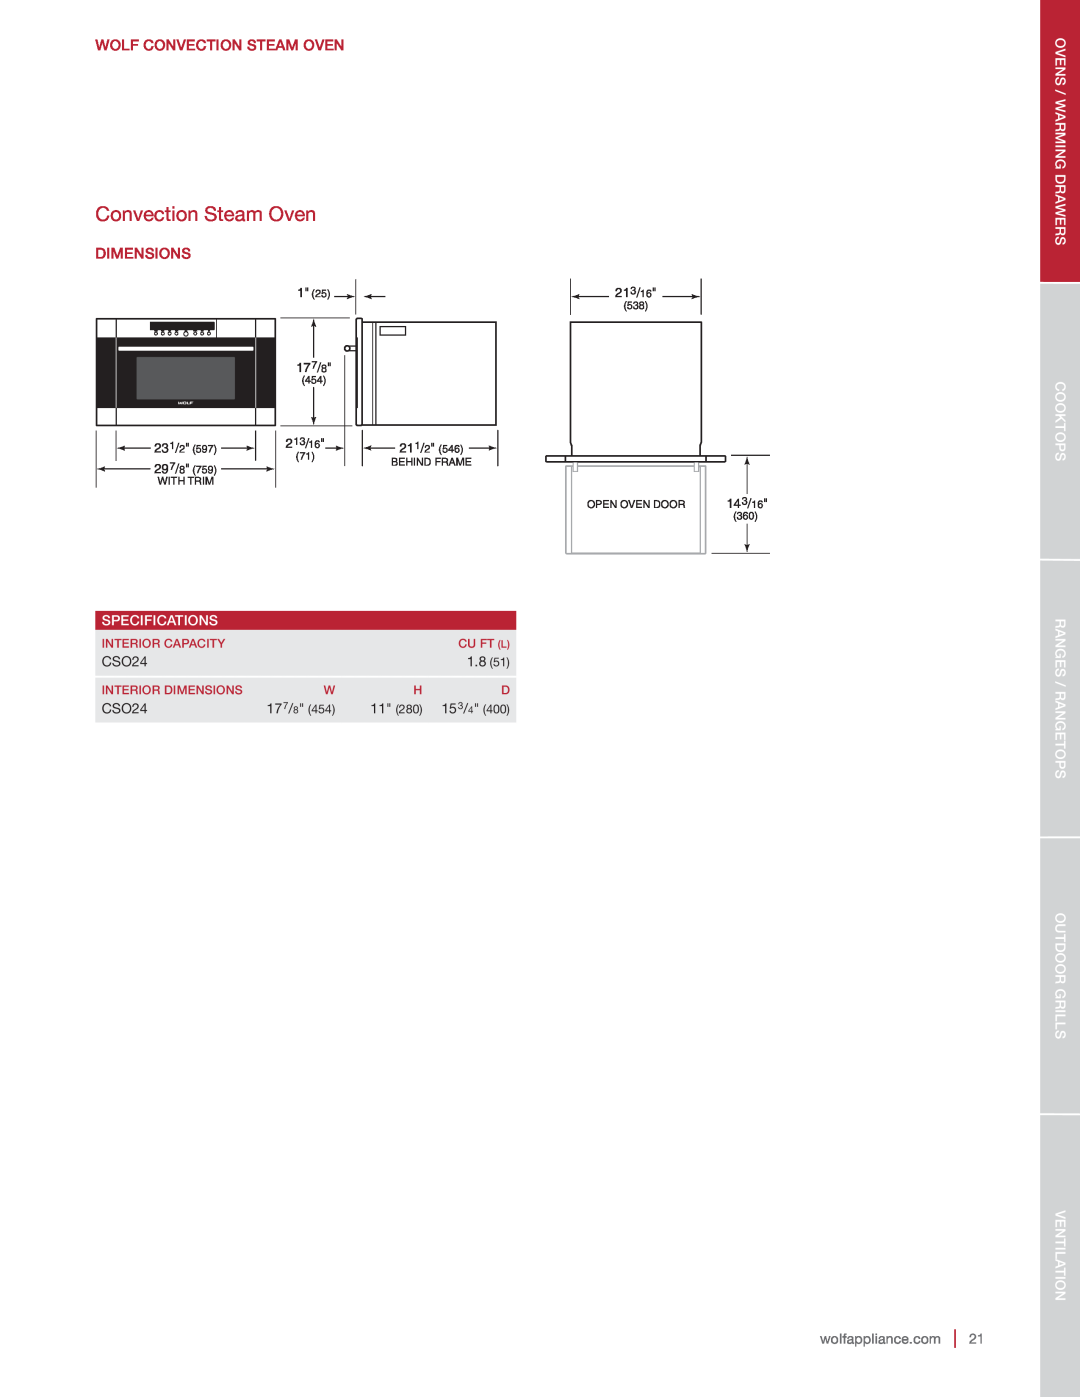 Sub-Zero DO30-2F/S-PH DO30PE/S/PH Wolf Convection Steam Oven, Dimensions, Ovens / Warming Drawers, Specifications 